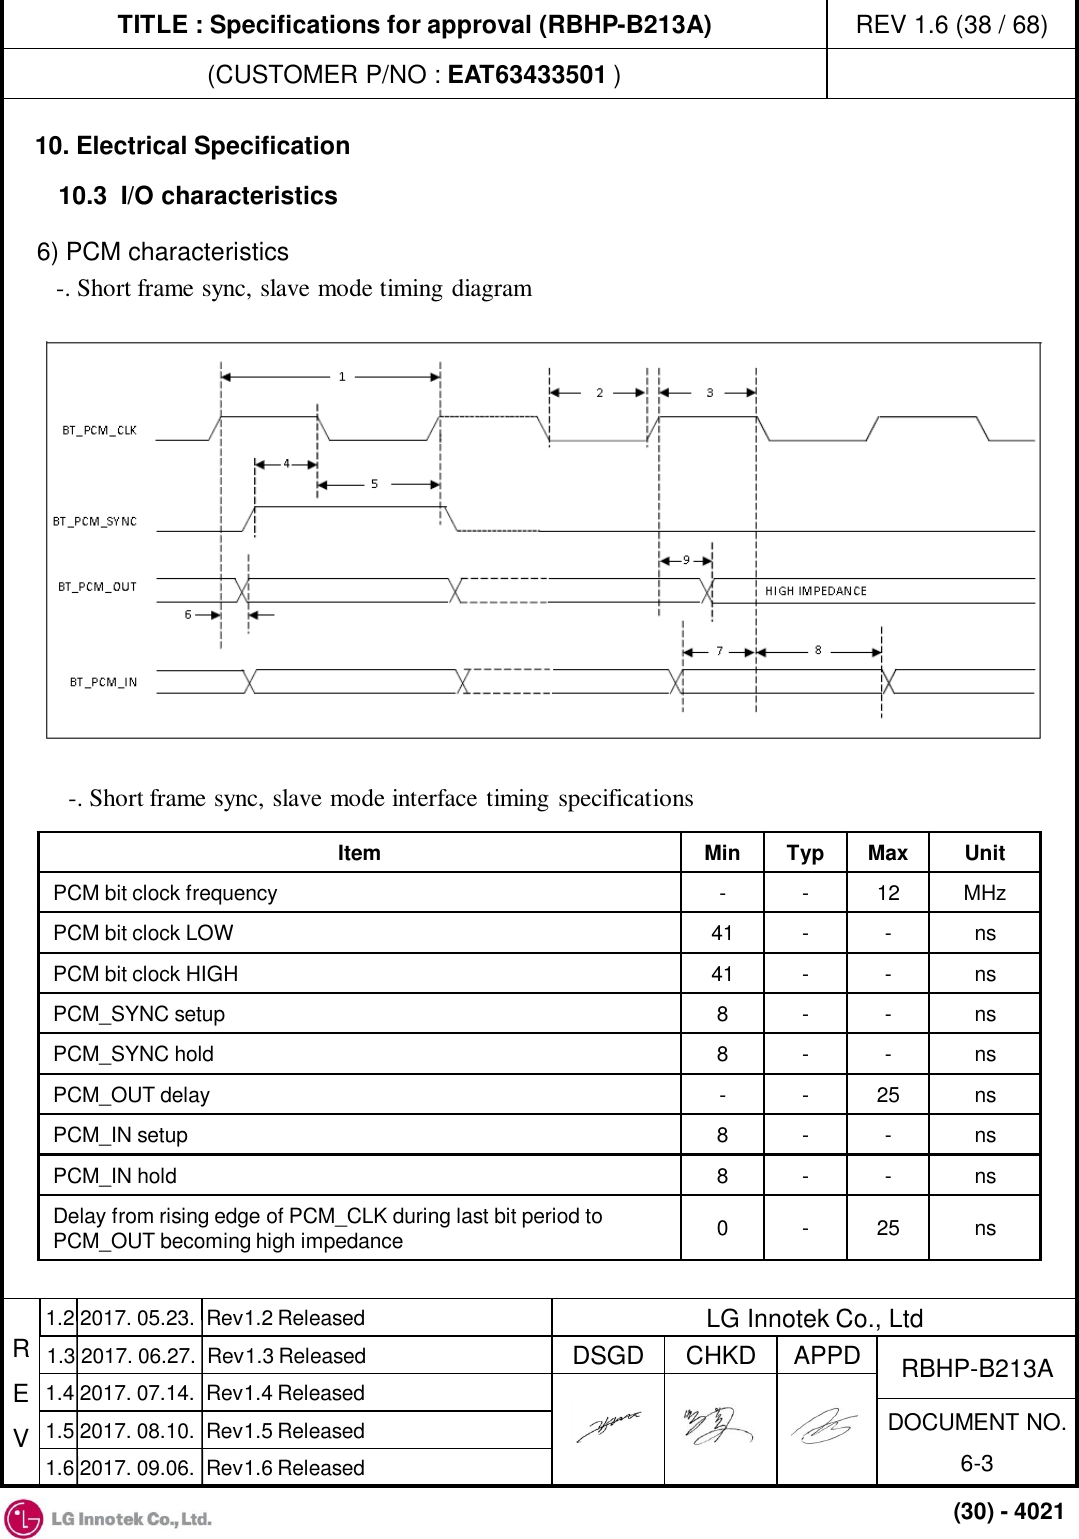 TITLE : Specifications for approval (RBHP-B213A) (CUSTOMER P/NO : EAT63433501 ) REV 1.6 (38 / 68) R E V APPD CHKD DSGD DOCUMENT NO. 6-3 RBHP-B213A LG Innotek Co., Ltd 1.4 2017. 07.14.  Rev1.4 Released 1.5 2017. 08.10.  Rev1.5 Released (30) - 4021 1.2 2017. 05.23.  Rev1.2 Released 1.3 2017. 06.27.  Rev1.3 Released 1.6 2017. 09.06.  Rev1.6 Released 10. Electrical Specification 10.3  I/O characteristics  6) PCM characteristics  -. Short frame sync, slave mode timing diagram -. Short frame sync, slave mode interface timing specifications Item  Min  Typ  Max  Unit PCM bit clock frequency  -  -  12  MHz PCM bit clock LOW  41  -  -  ns PCM bit clock HIGH  41  -  -  ns PCM_SYNC setup  8  -  -  ns PCM_SYNC hold  8  -  -  ns PCM_OUT delay  -  -  25 ns PCM_IN setup  8  -  -  ns PCM_IN hold  8  -  -  ns Delay from rising edge of PCM_CLK during last bit period to PCM_OUT becoming high impedance  0  -  25 ns 